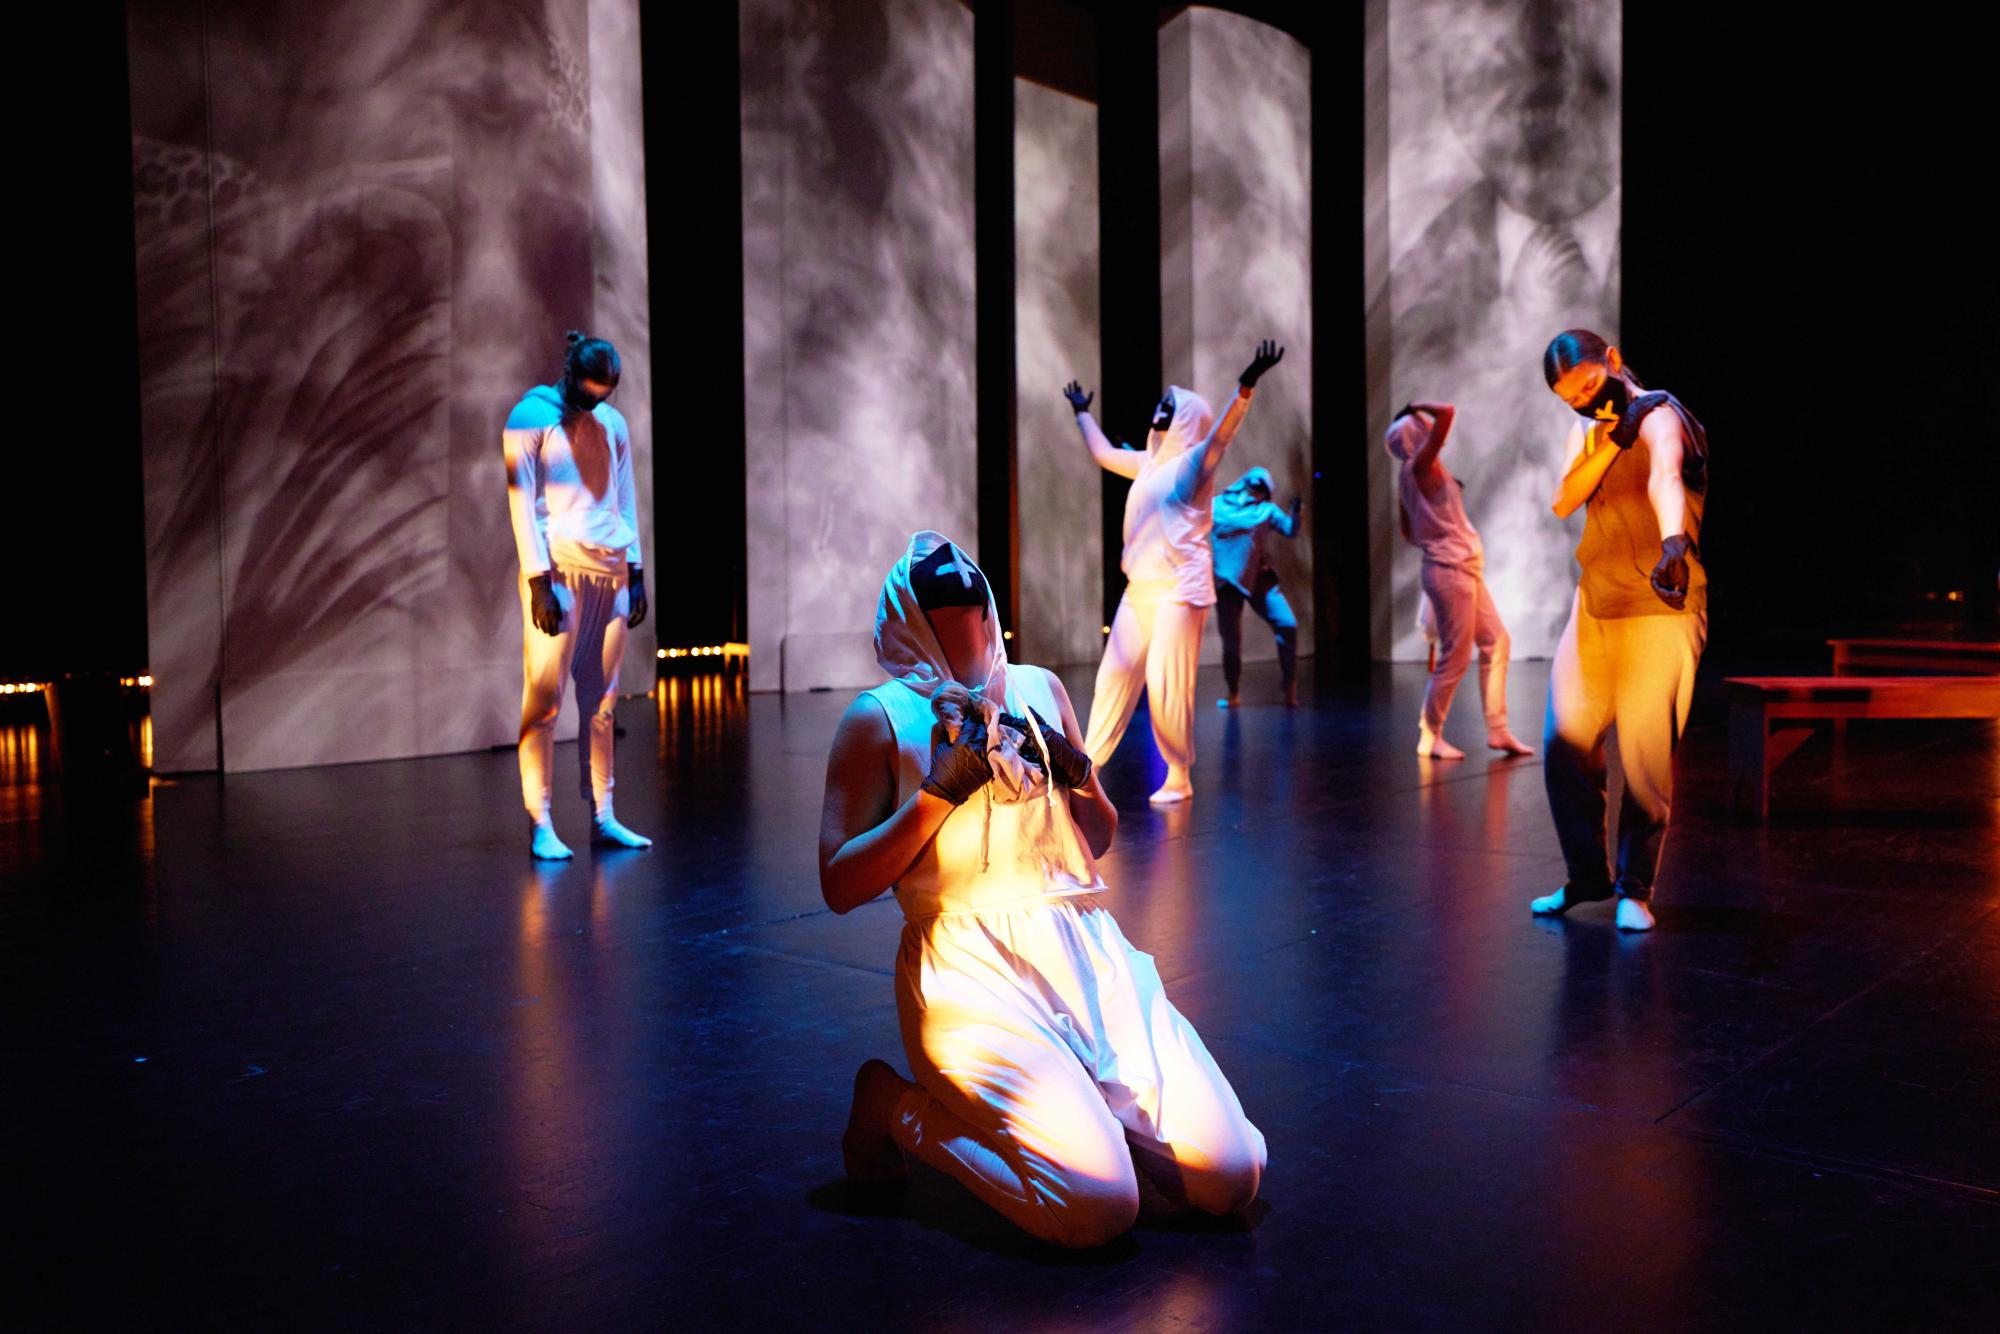 dancer in all white faces upwards, sitting on their knees with five other dancers moving behind them